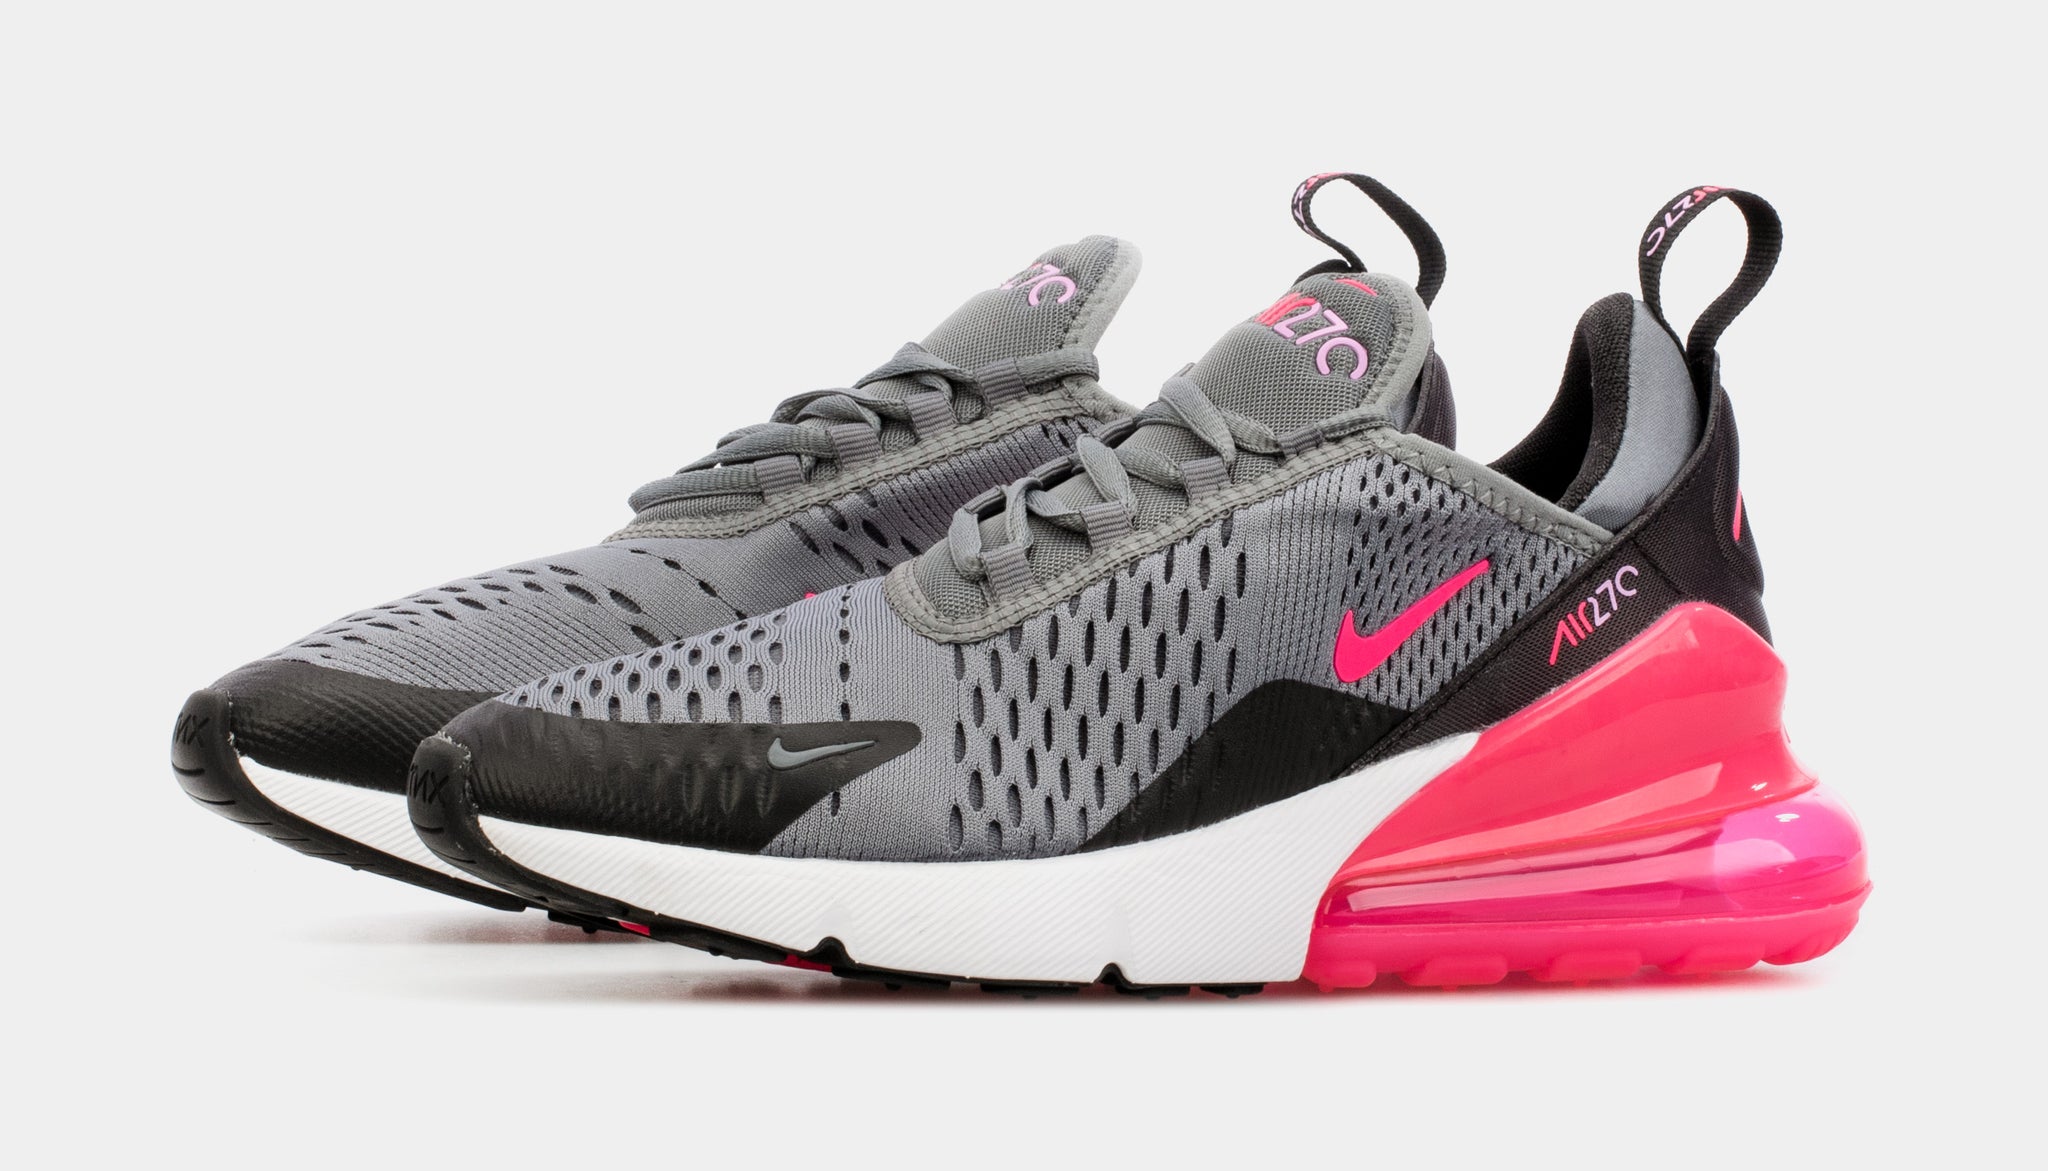 Nike Air Max 270 Grade School Shoes Pink 943345-031 – Shoe Palace